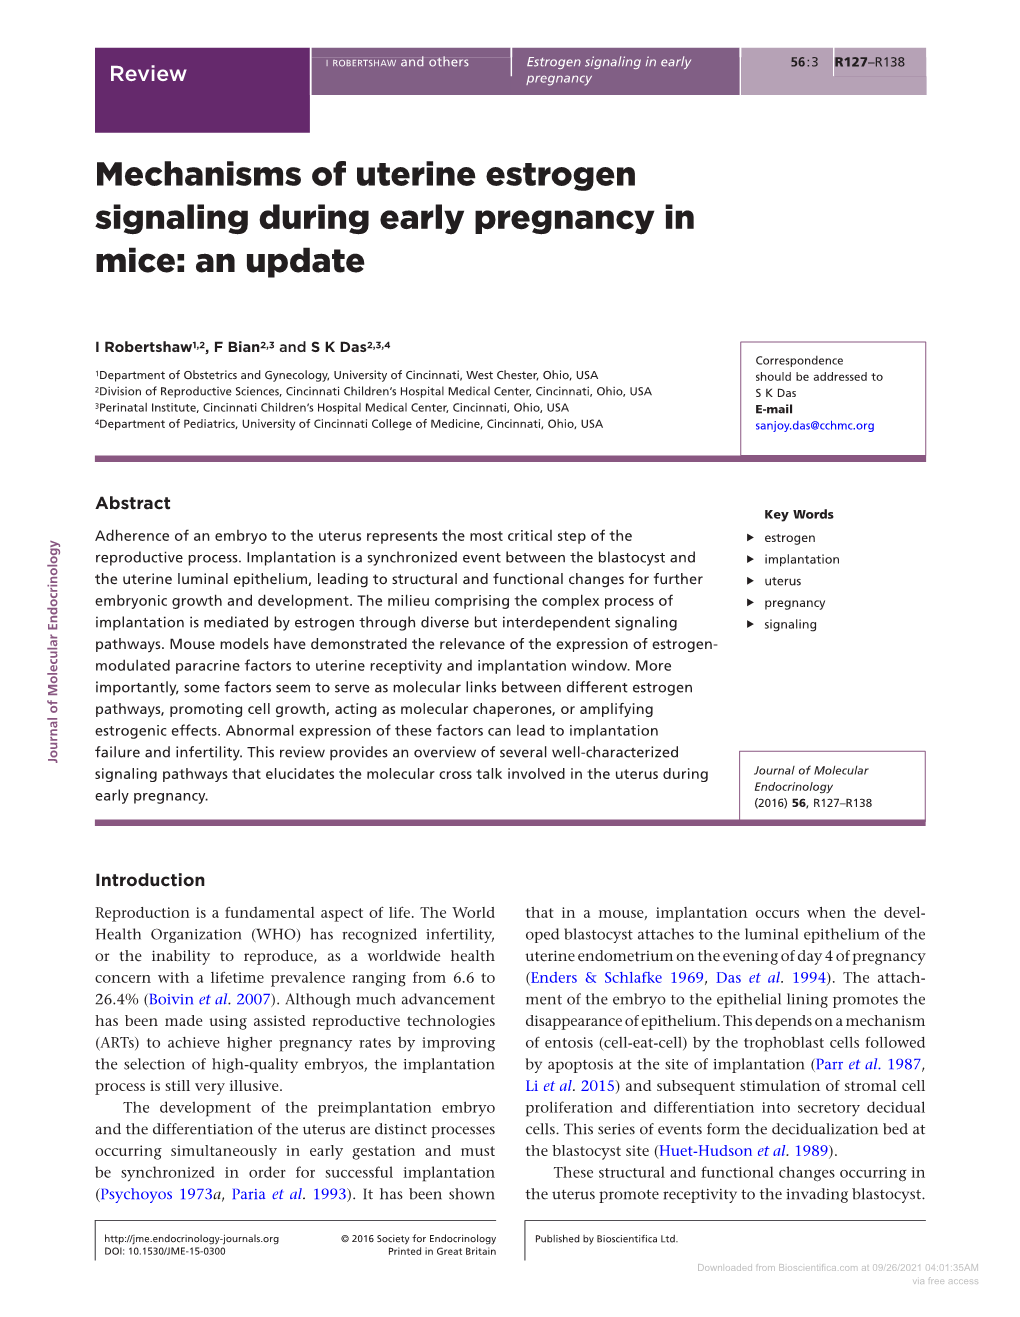 Mechanisms of Uterine Estrogen Signaling During Early Pregnancy in Mice: an Update